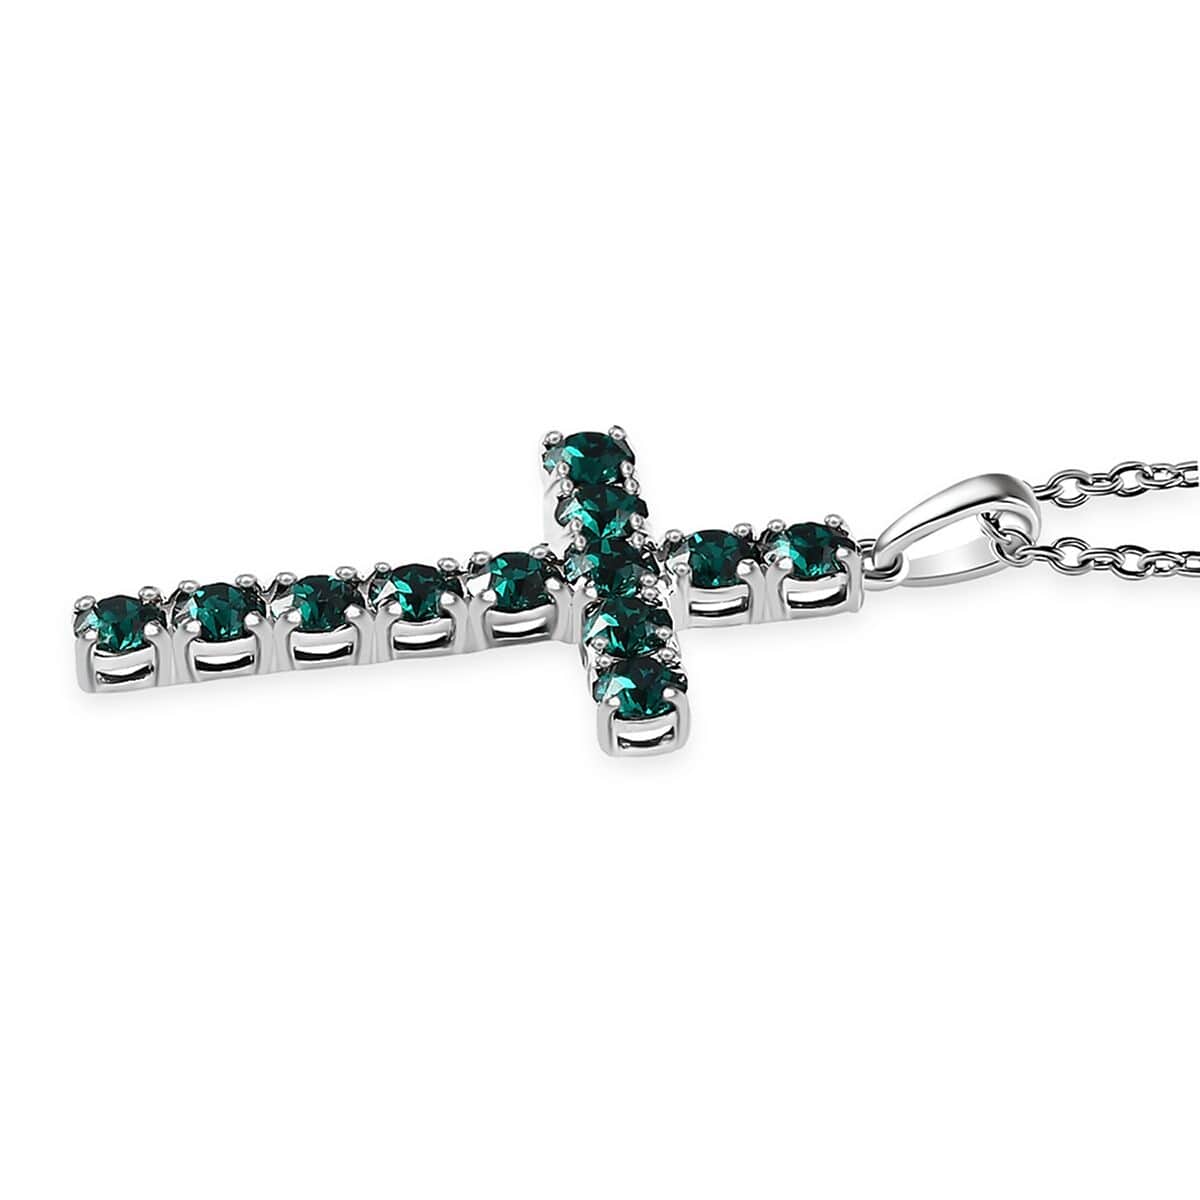 Designer Premium Emerald Color Austrian Crystal Cross Pendant in Sterling Silver with Stainless Steel Necklace 20 Inches image number 3